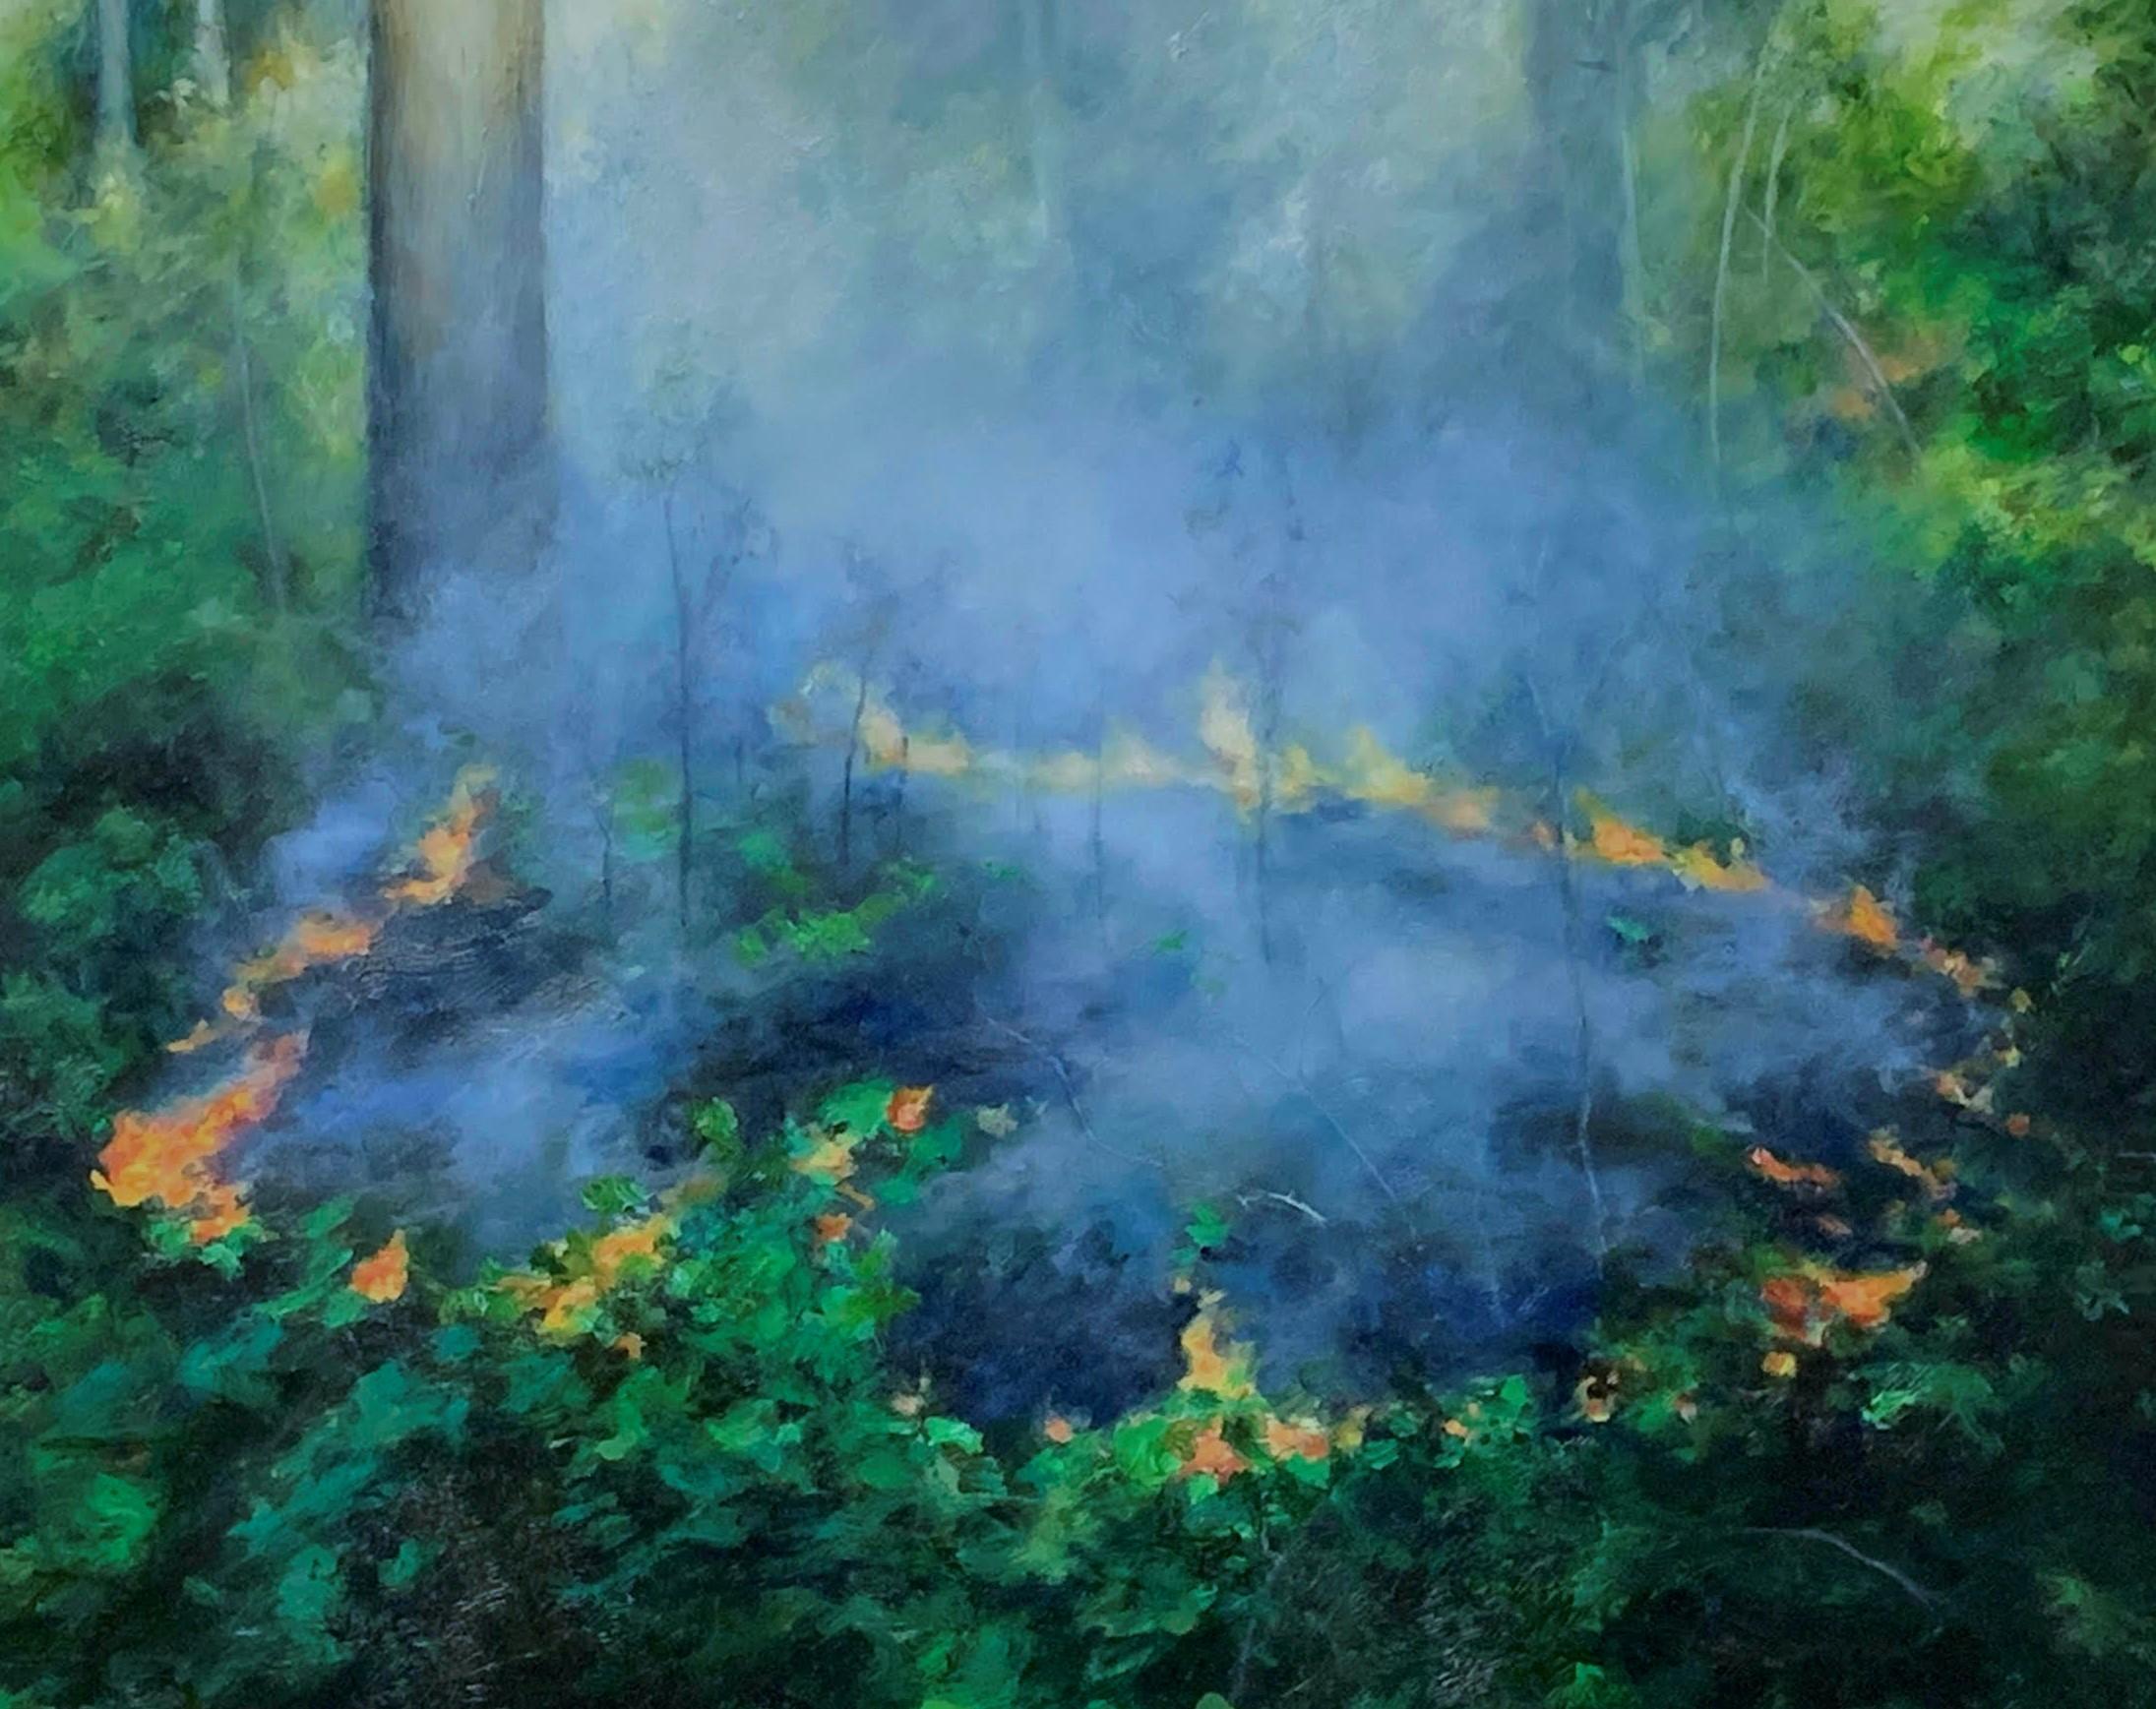 Controlled Burn 3 - Ring of Fire with Hazy Smoke in a Dense Forest, Oil on Panel - Painting by Elsa Muñoz